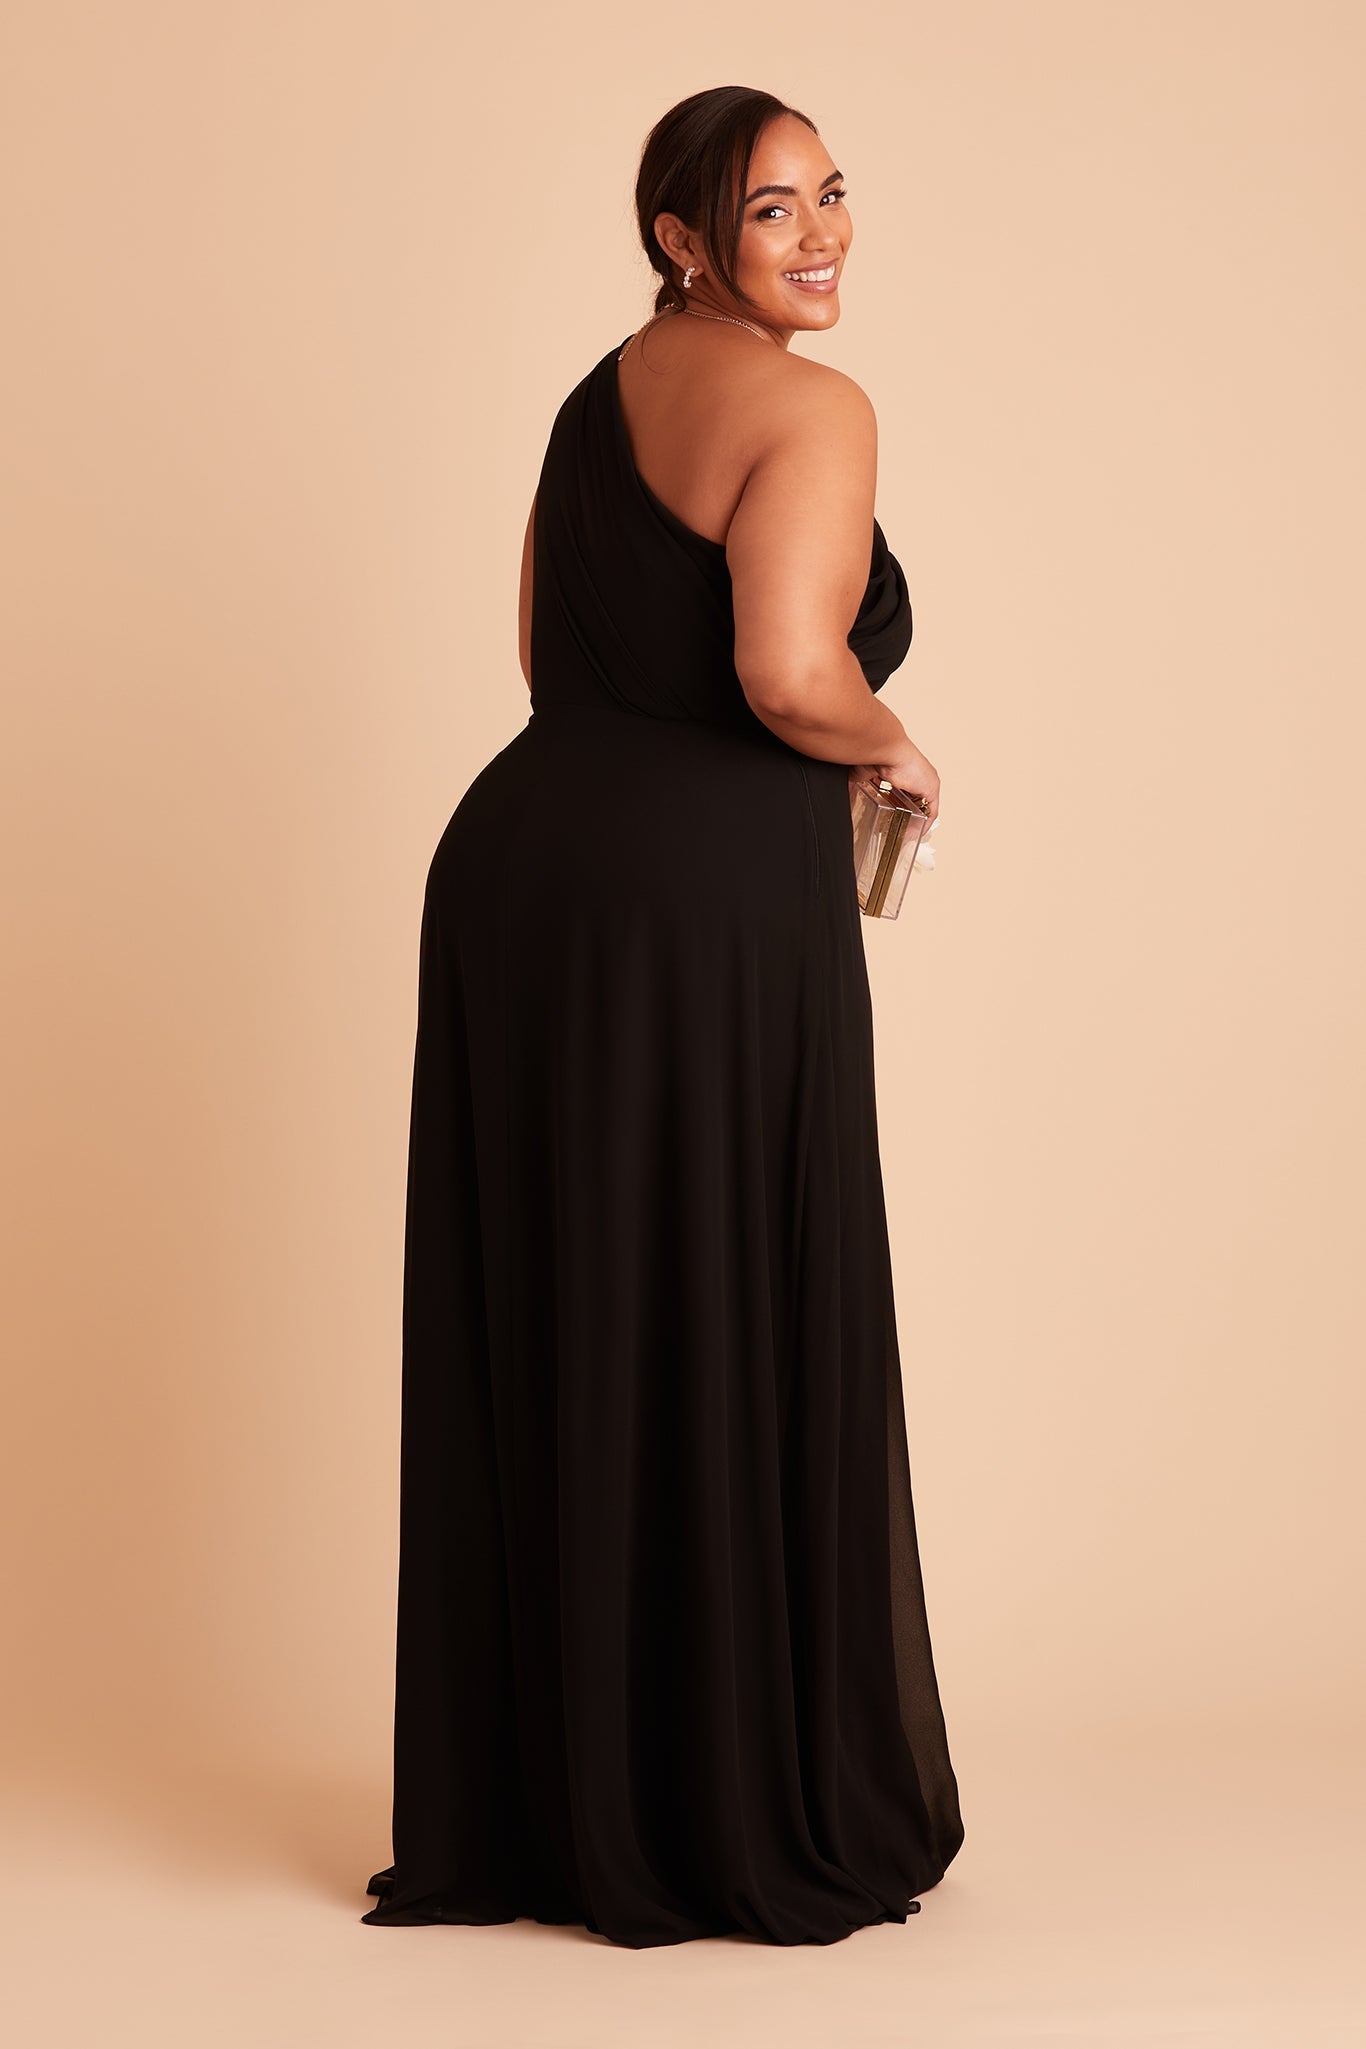 Front view of the Kira Dress Curve in black chiffon without the optional slit shows a slender model with a light skin tone wearing an asymmetrical one-shoulder, full-length dress. Soft pleating gathers at the left shoulder of the bodice with a smooth fit at the waist as the dress flows to the floor.